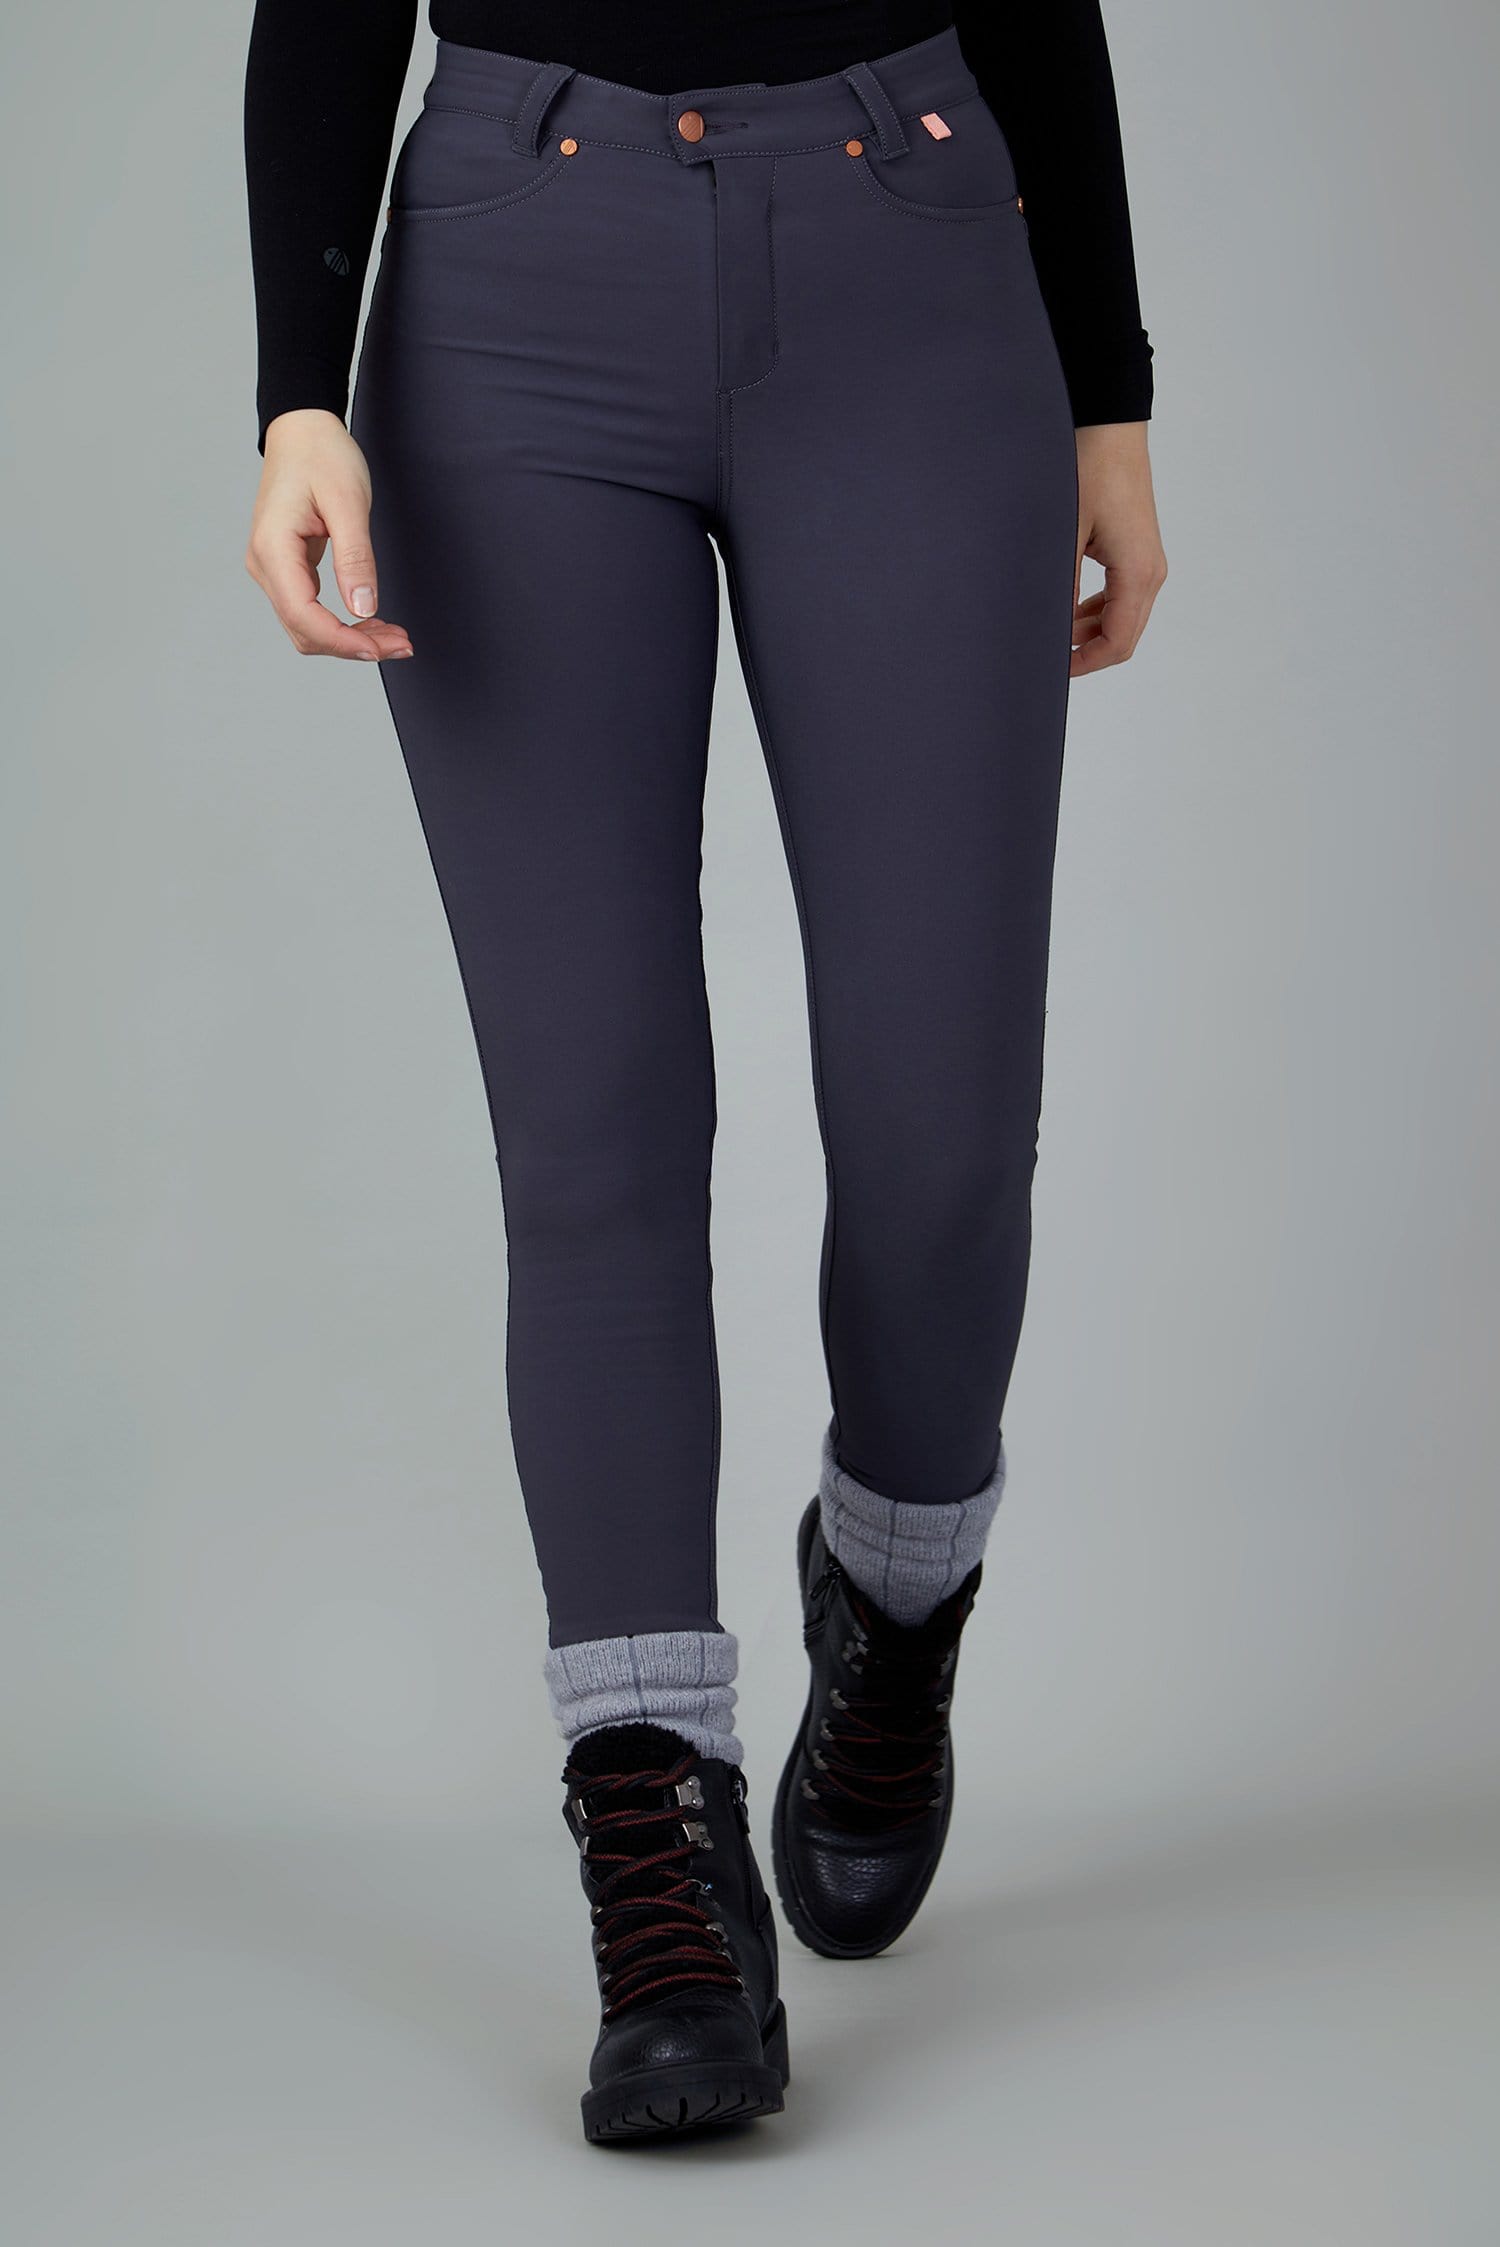 The Aventurite Stretch Skinny Outdoor Trousers - Obsidian - 40l / Uk22 - Womens - Acai Outdoorwear